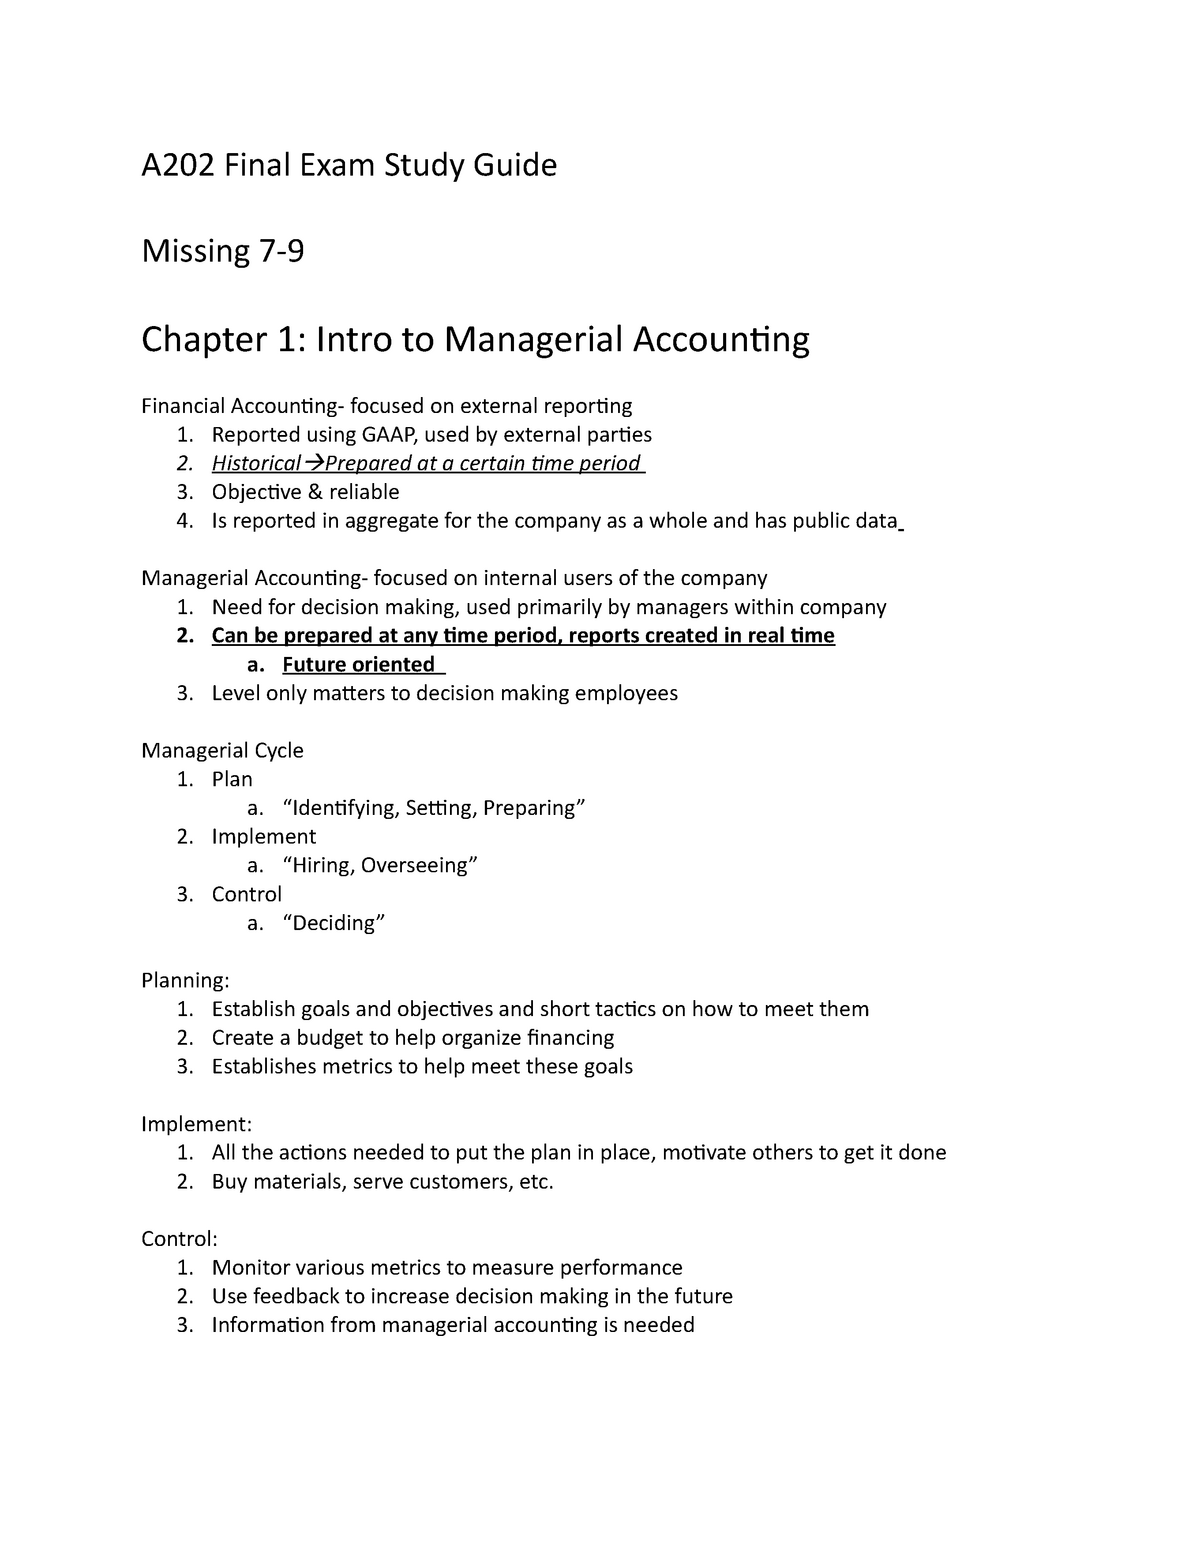 Managerial Vs Financial Accounting Quizlet - slide share